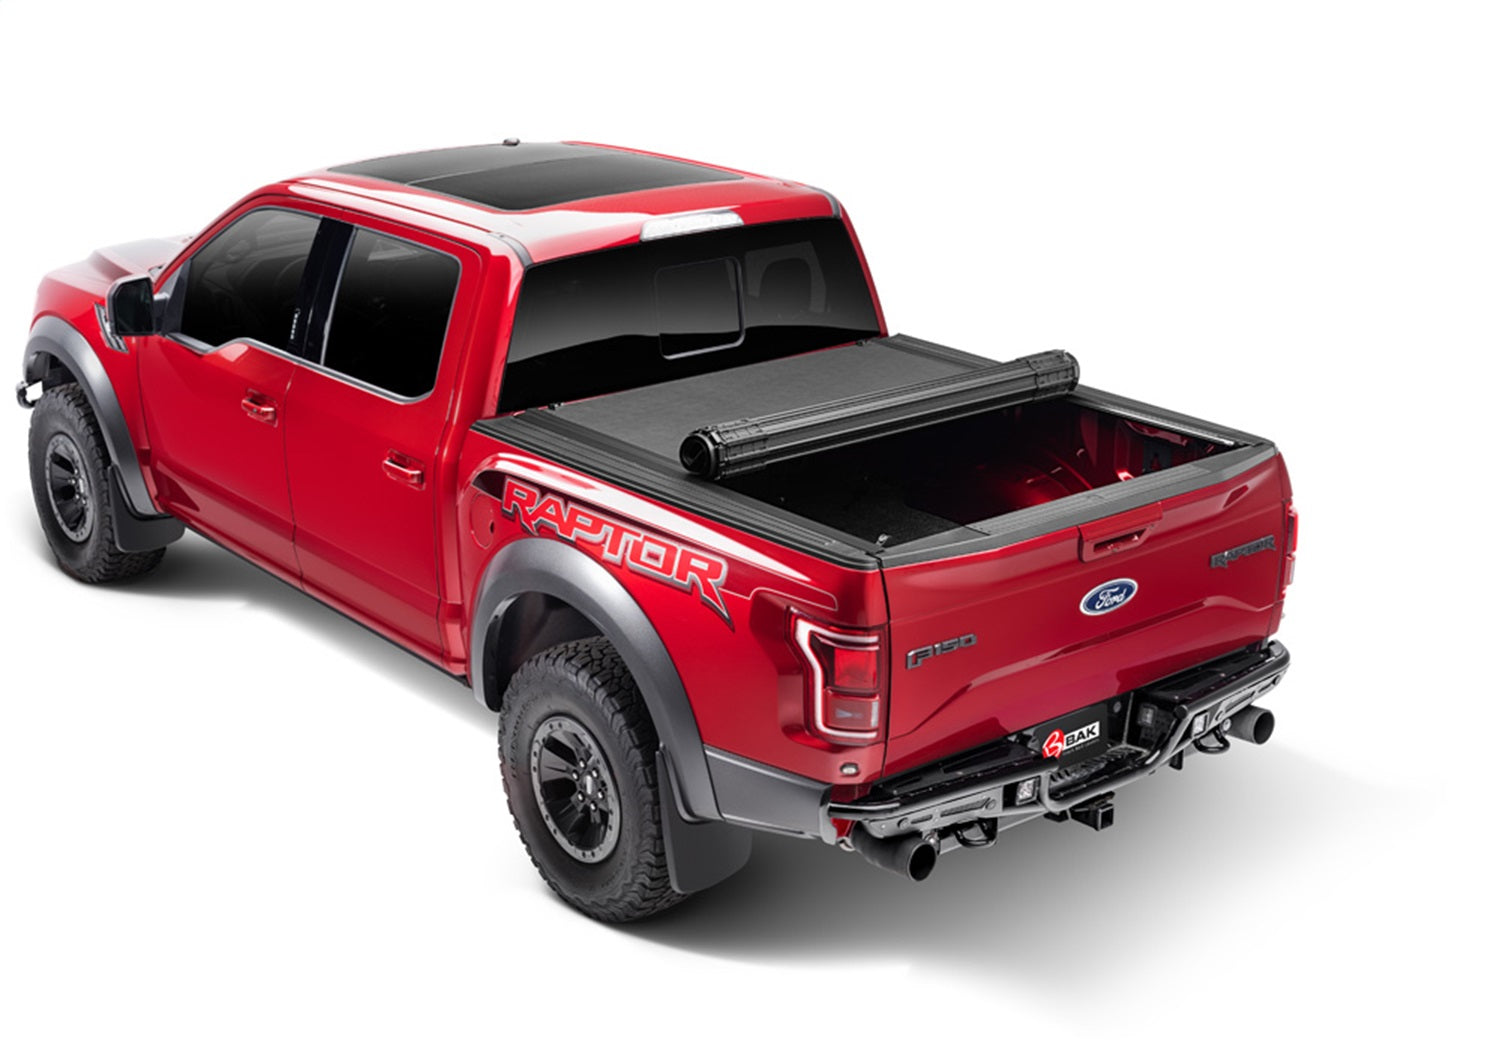 BAK Industries 80406 Revolver X4s Hard Rolling Truck Bed Cover Fits 05-15 Tacoma